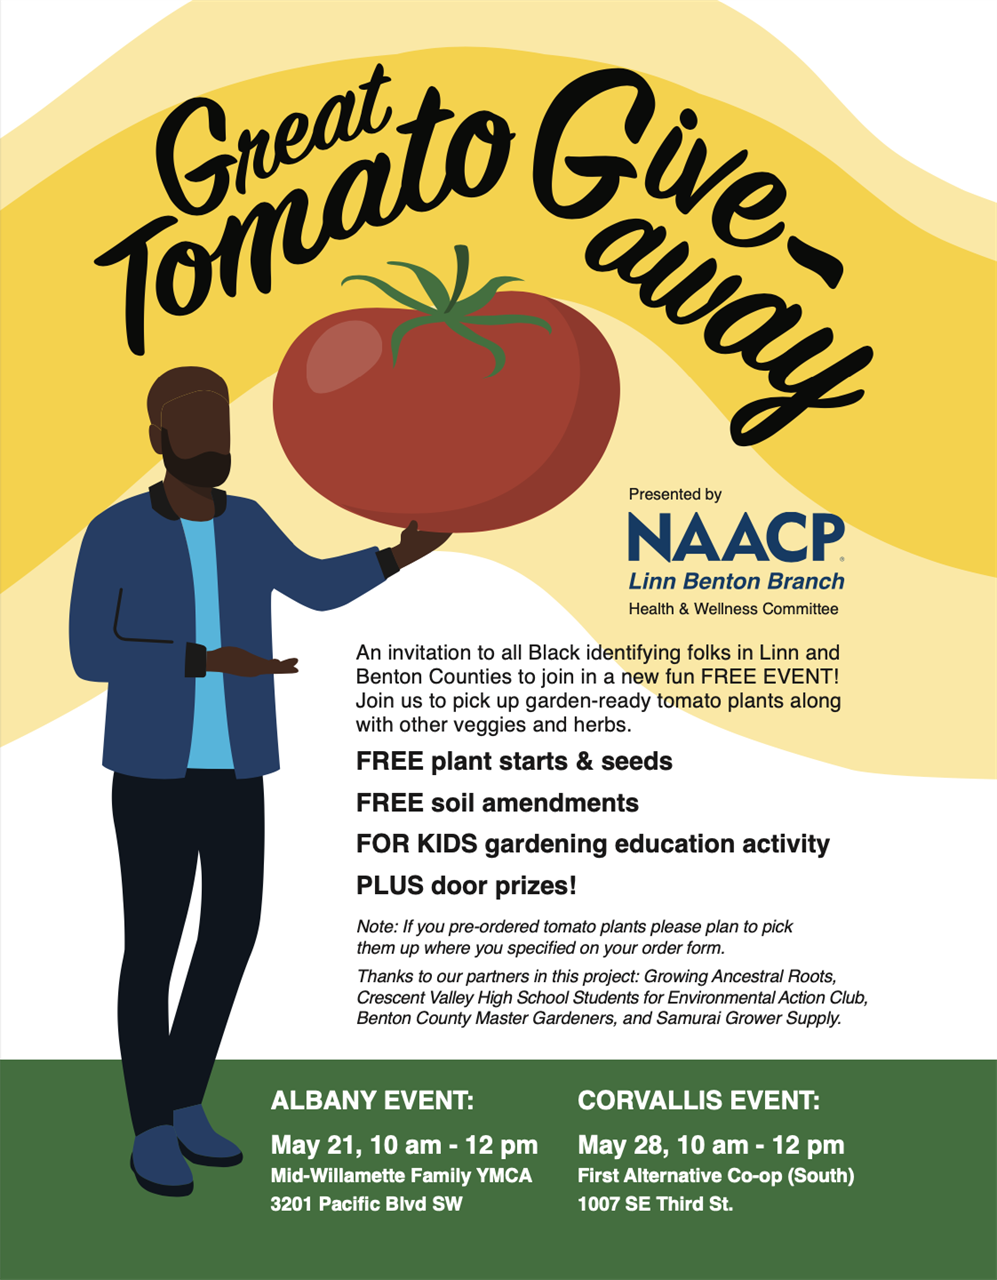 Green Tomato Giveaway Flyer